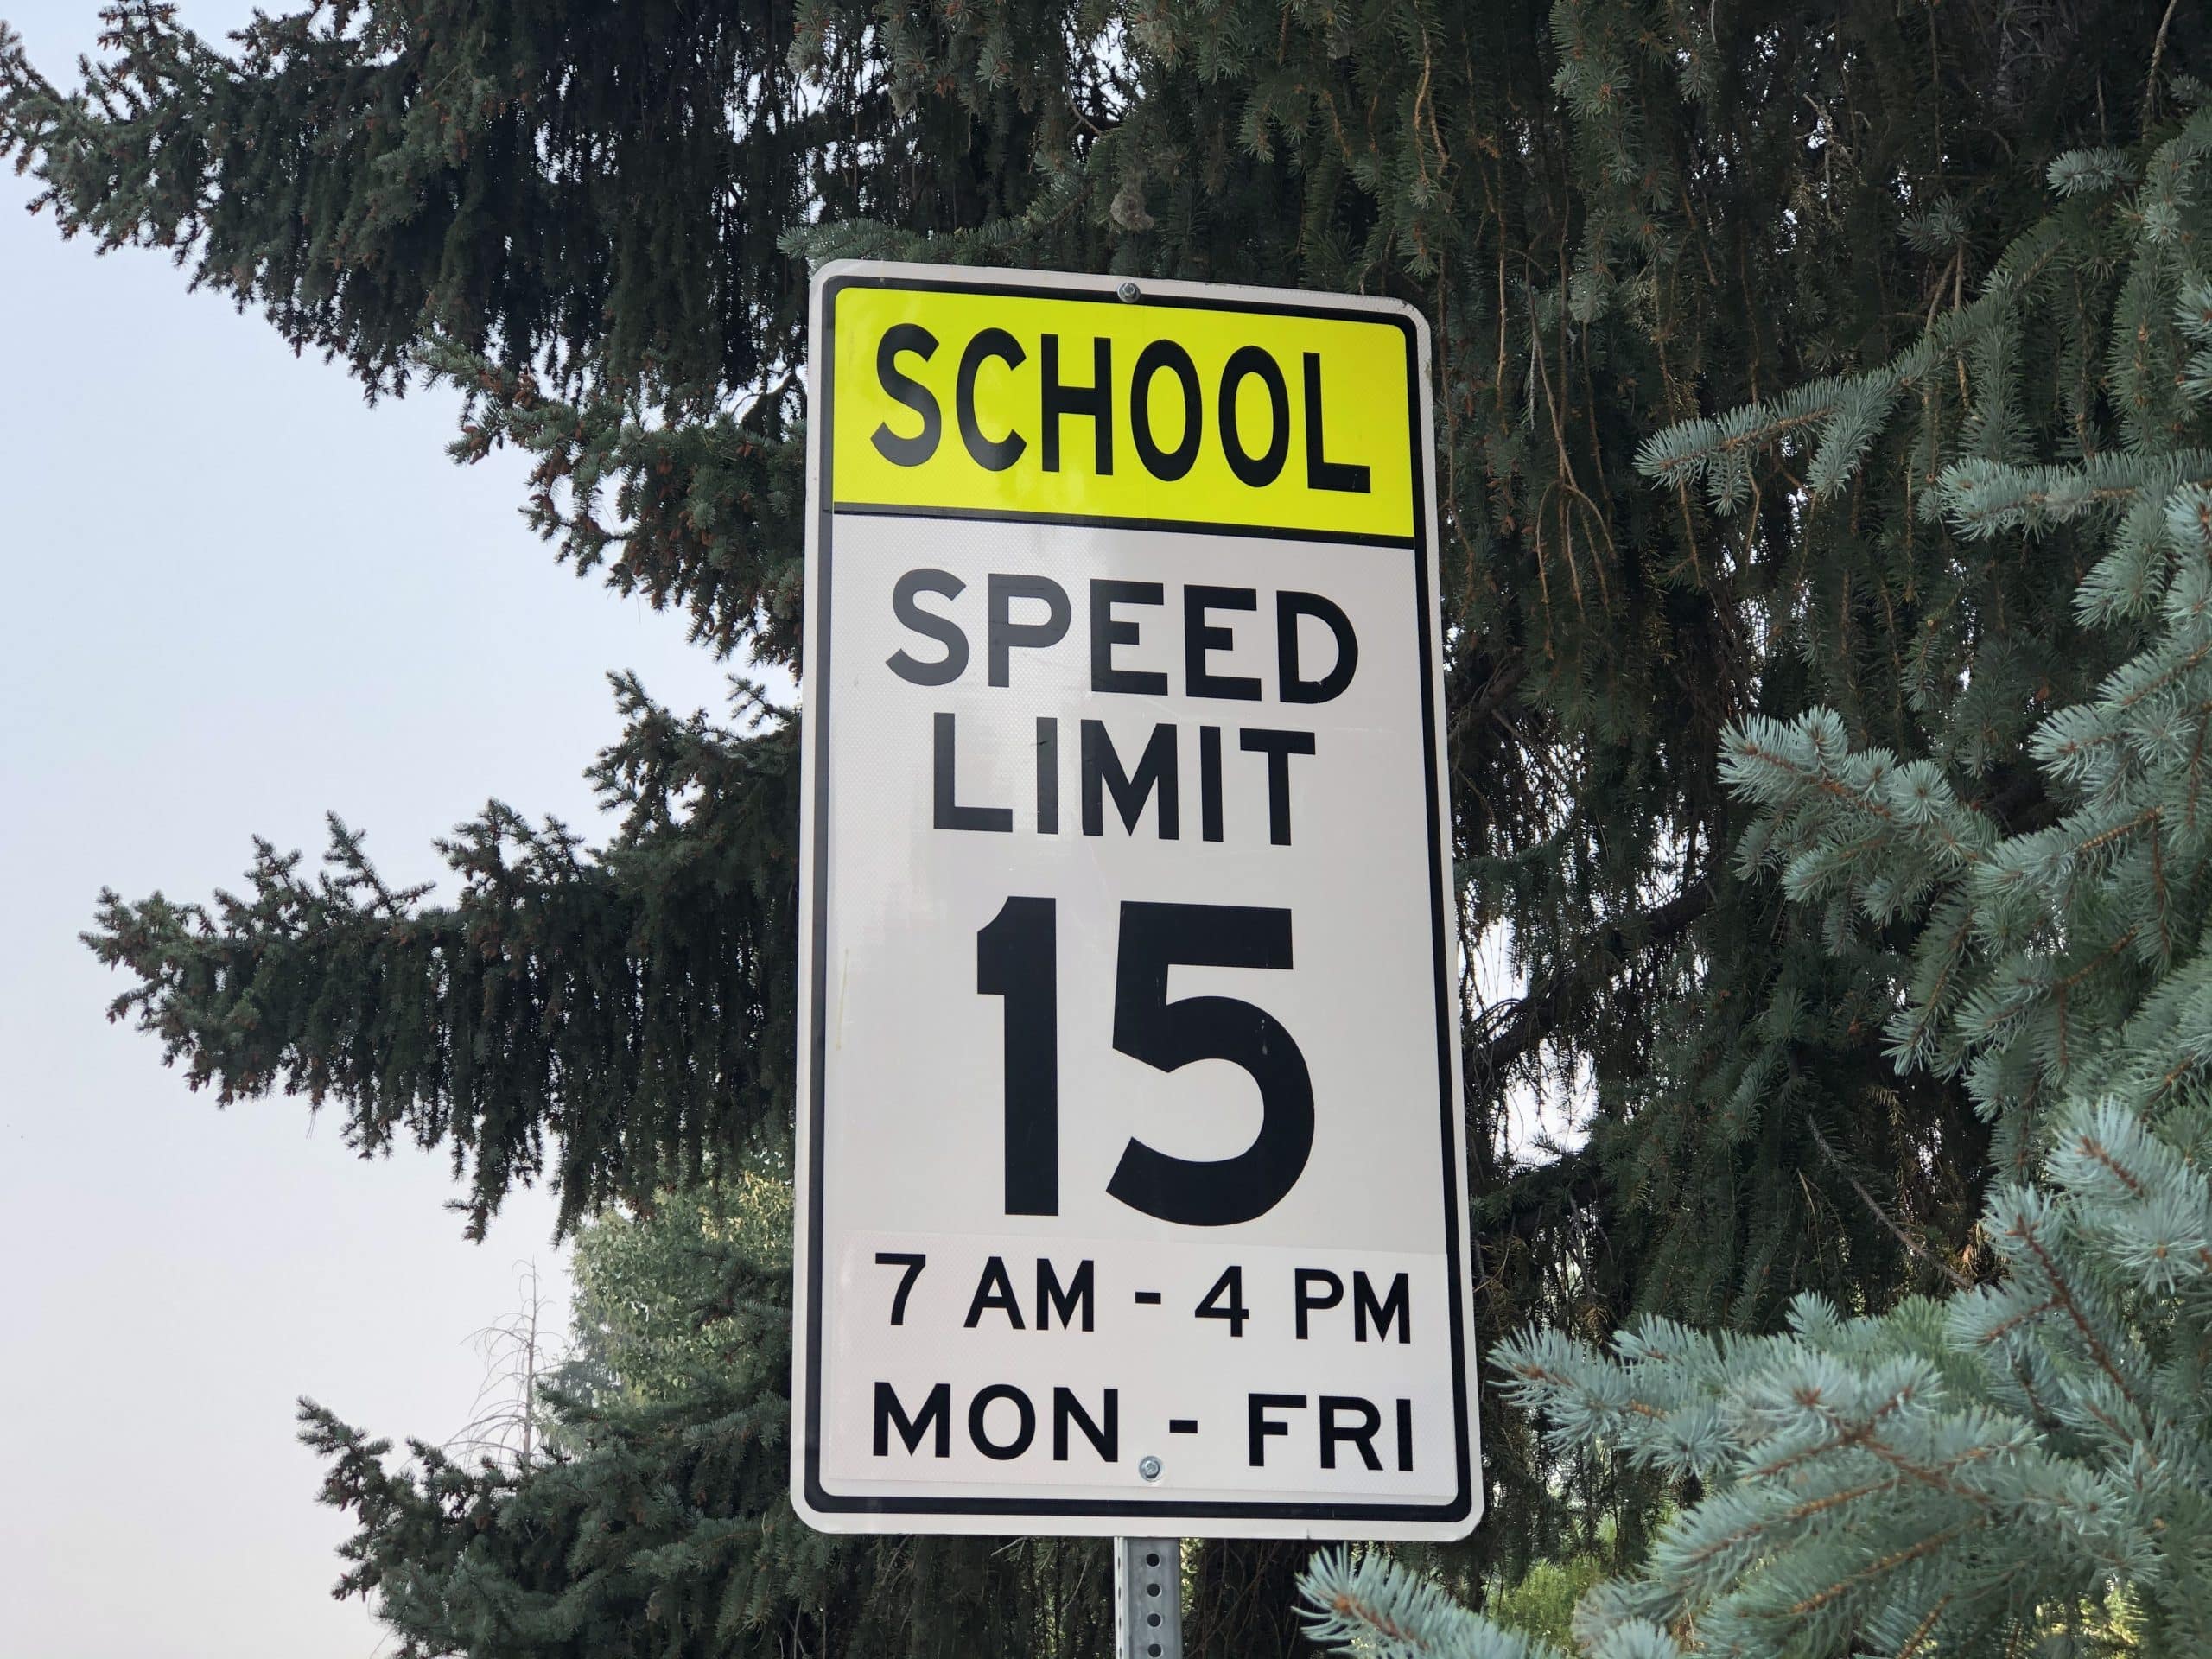 Carson City extends hours for 15 mph limit in school zones Serving